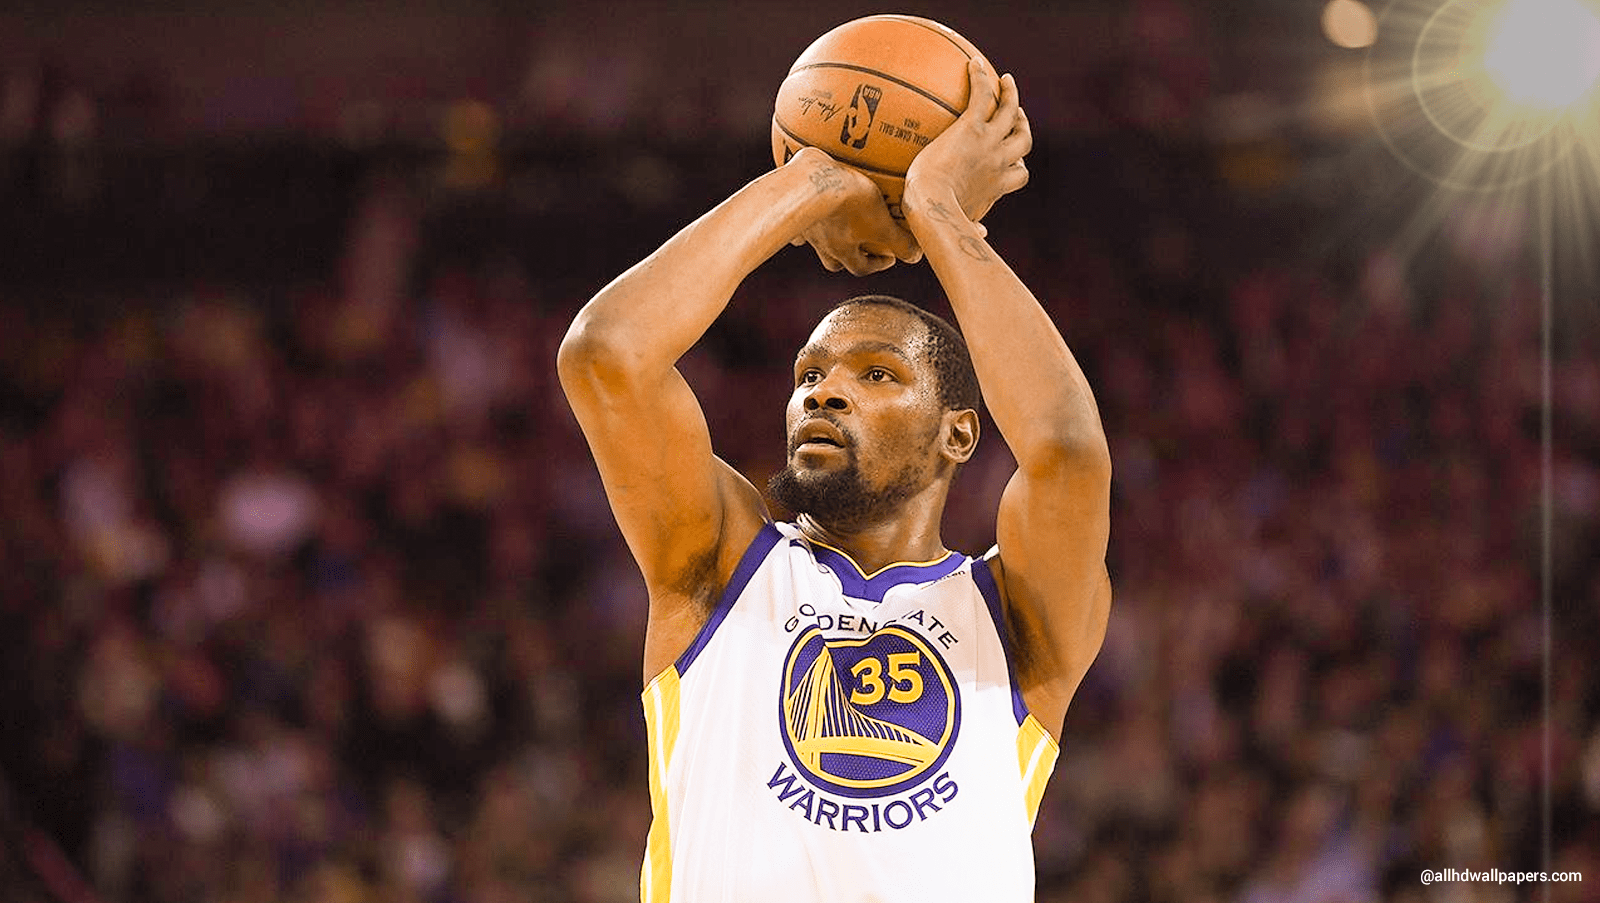 kevin durant wallpaper,basketball player,basketball moves,player,sports,basketball